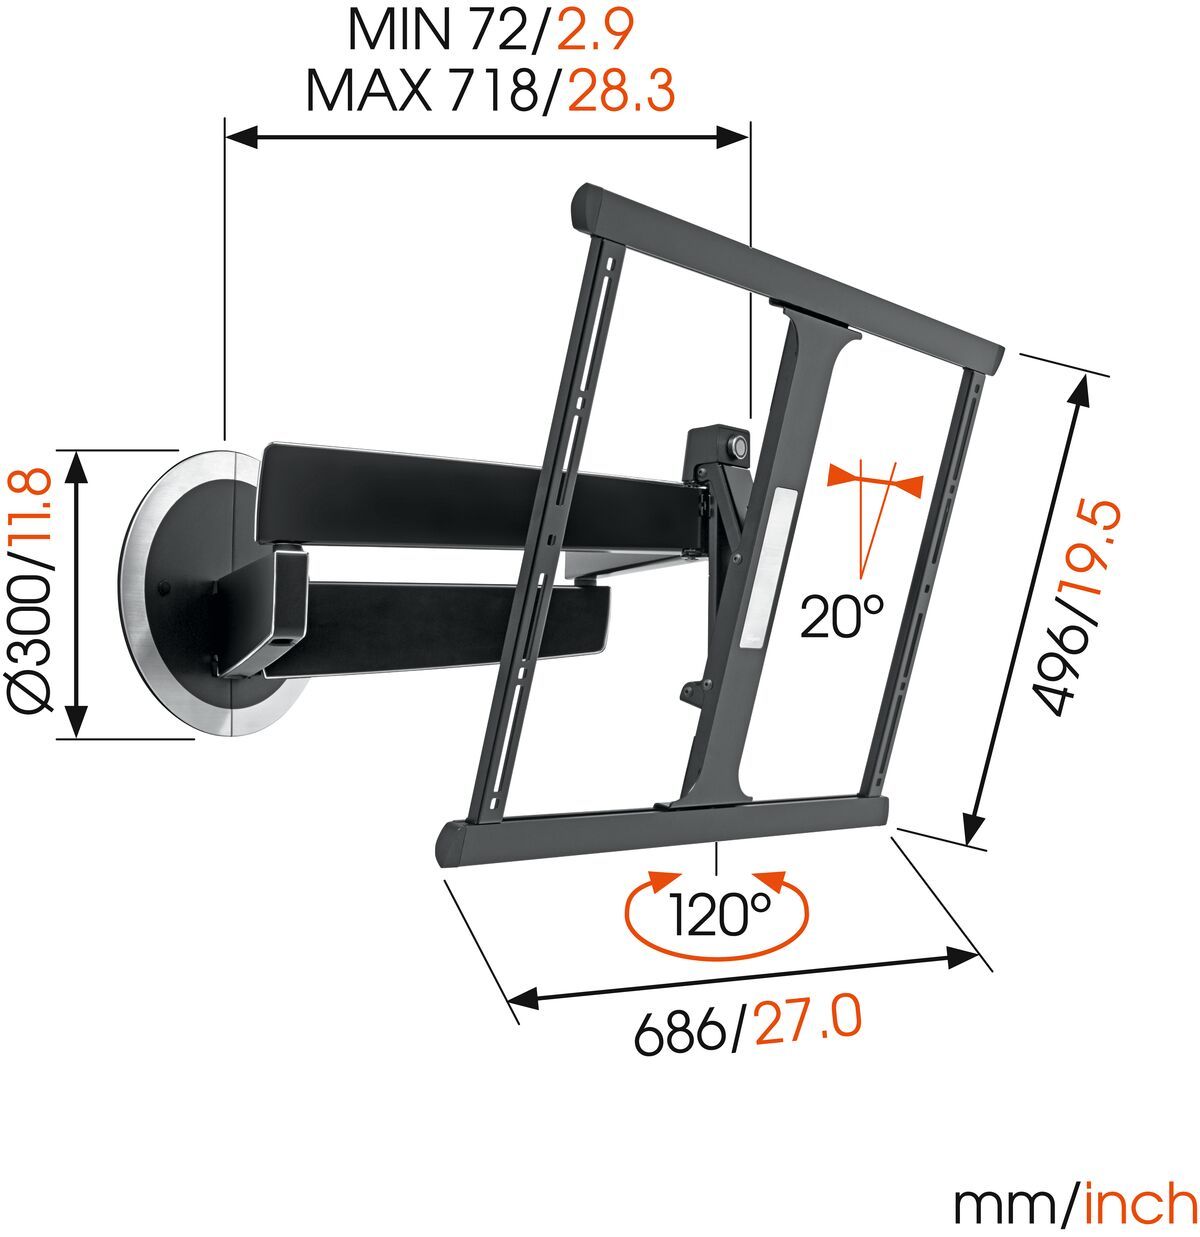 Vogel's DesignMount (NEXT 7345) Full-Motion TV Wall Mount - Suitable for 40 up to 65 inch TVs up to 30 kg - Motion (up to 120°) - Dimensions